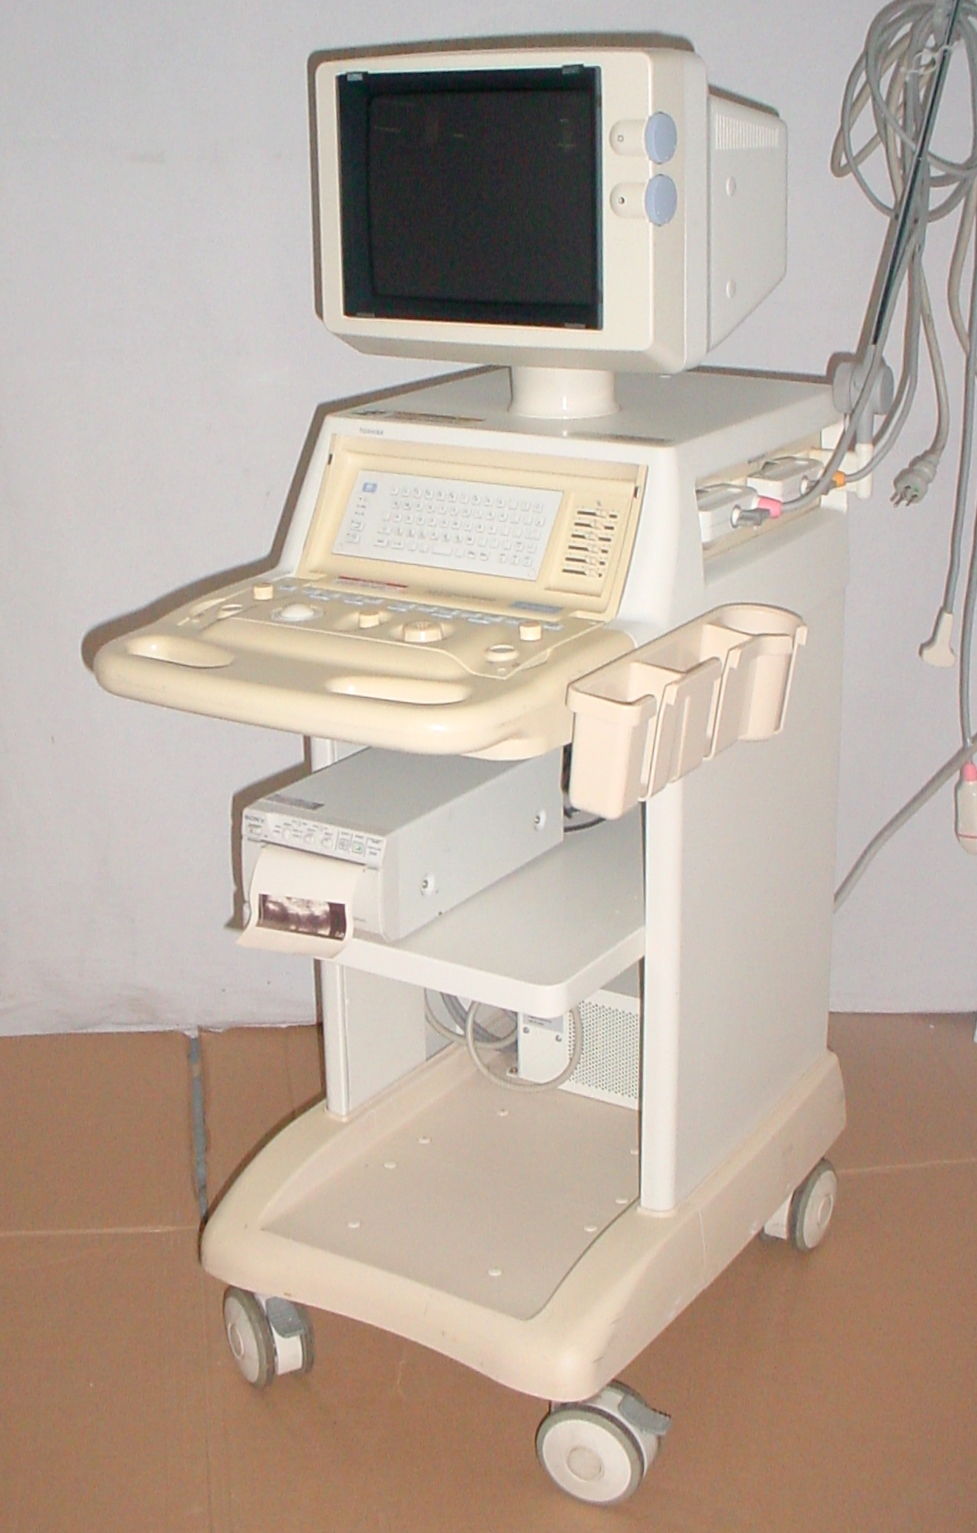 Toshiba Just Vision 400 SSA-325A Ultrasound w/ PVG-681S & PVF-745V Fetal Probes DIAGNOSTIC ULTRASOUND MACHINES FOR SALE